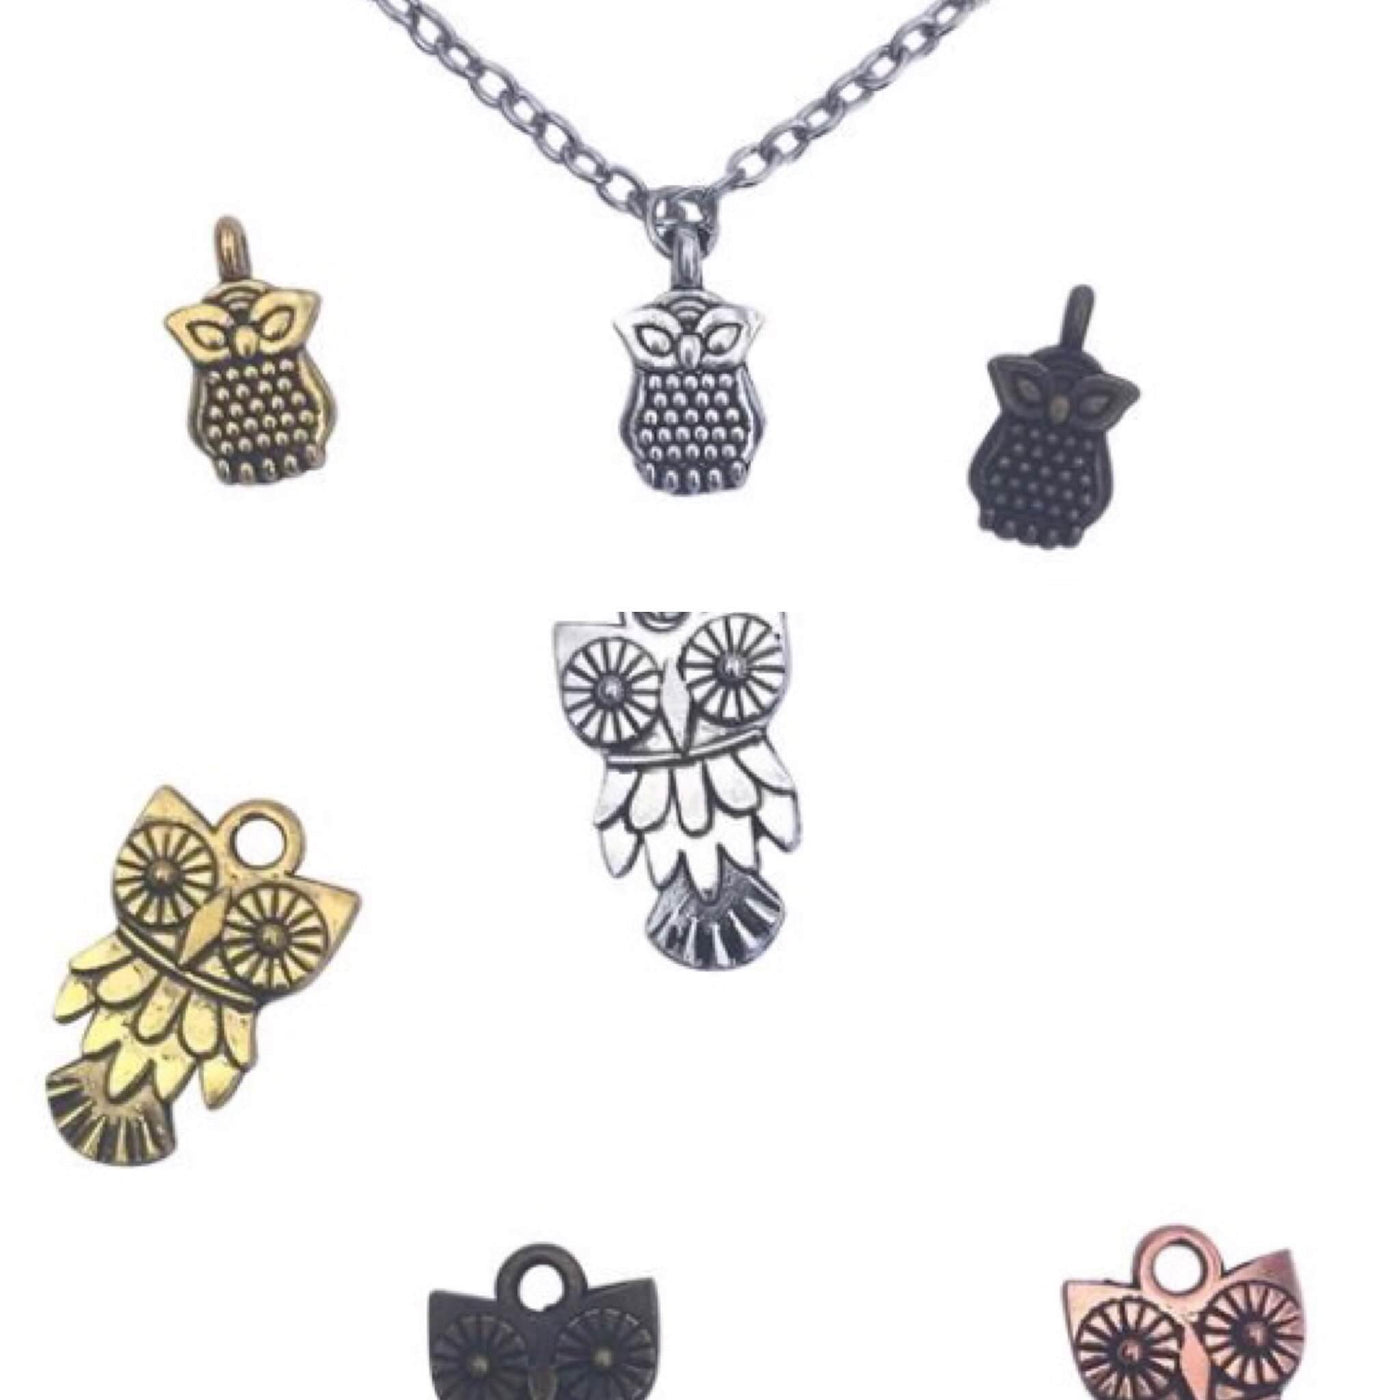 "Have a hoot with you" Owl Necklace Gift - Accessories - dalia + jade 